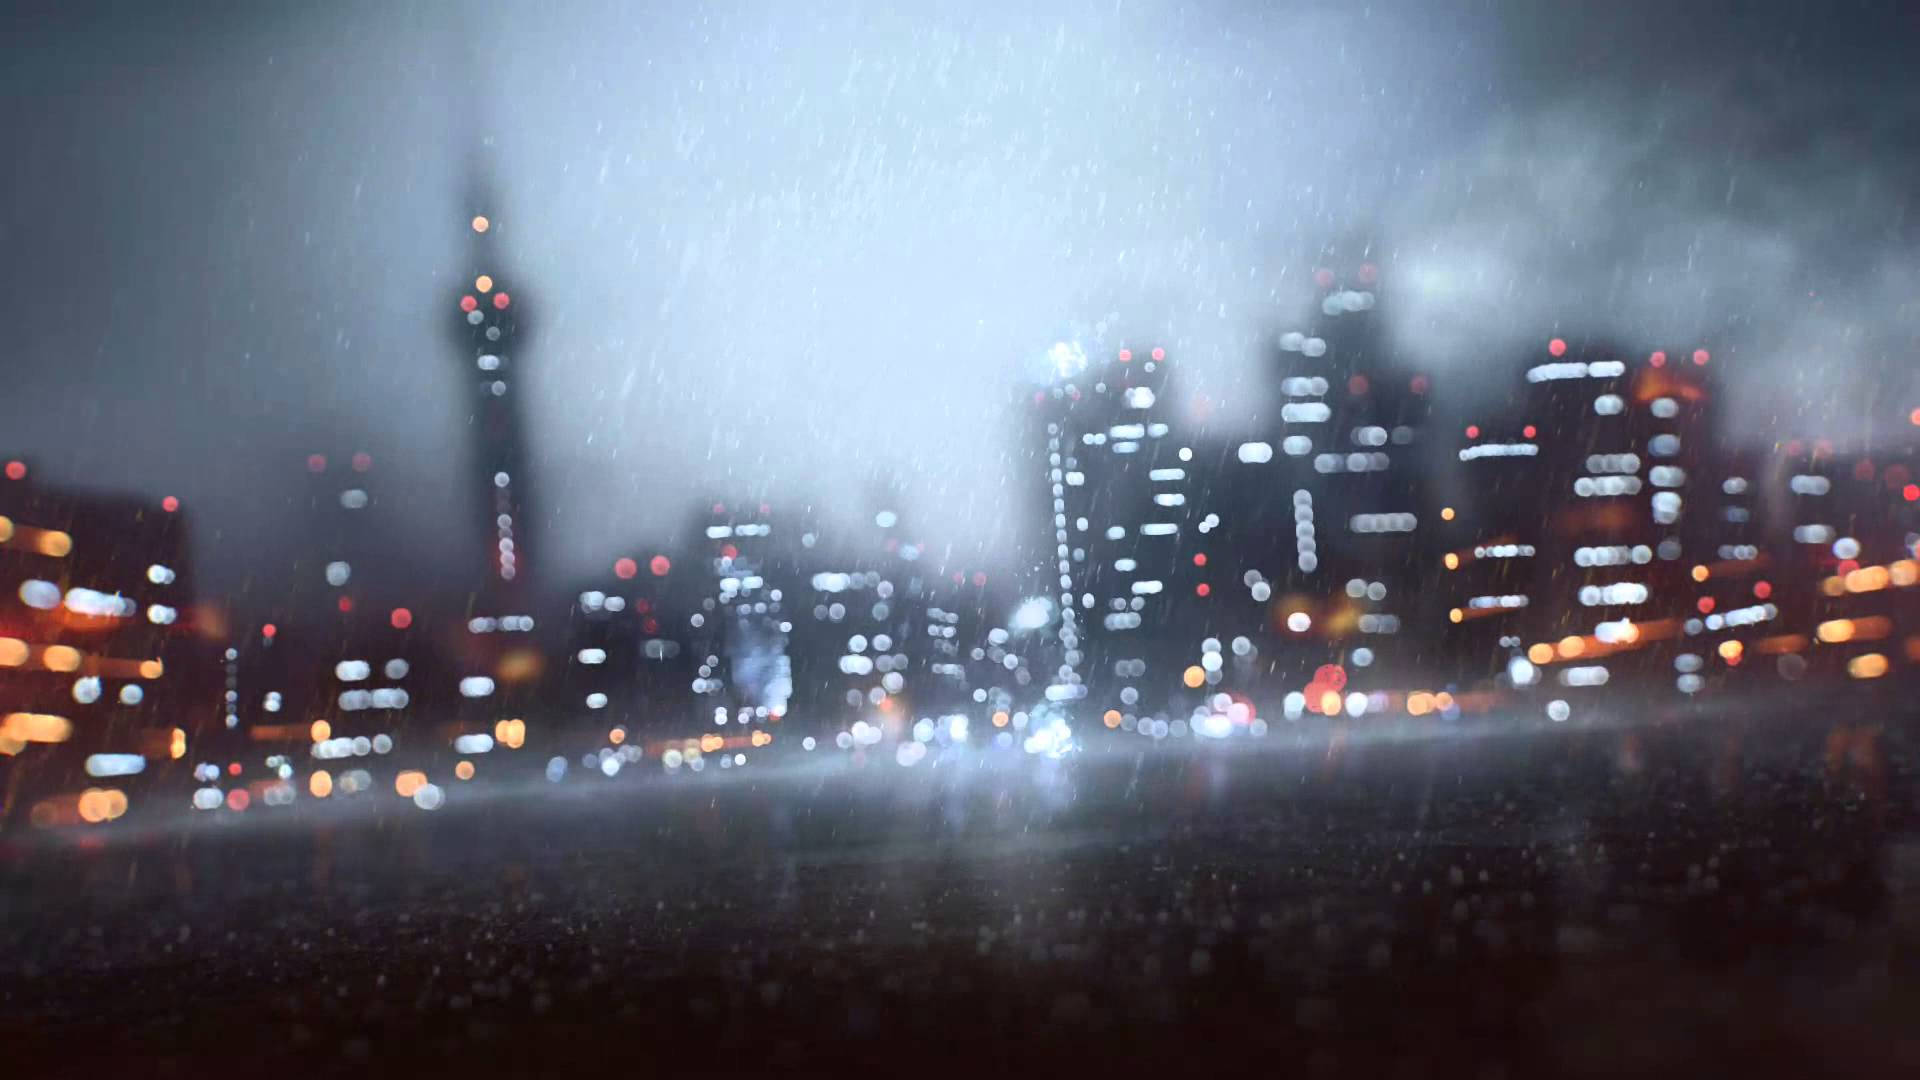 A Cityscape With Lights And Buildings In The Rain Wallpaper